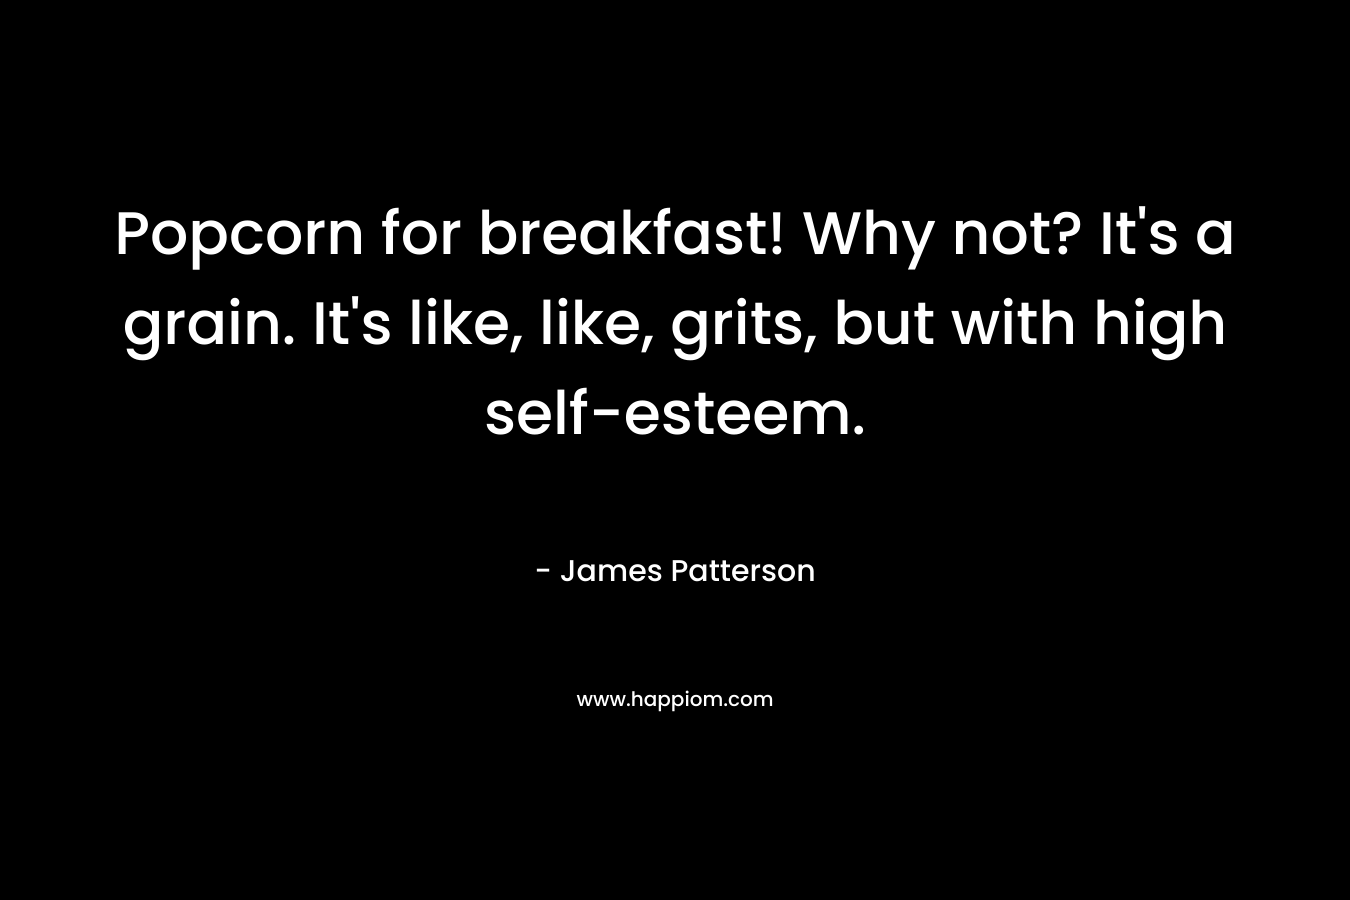 Popcorn for breakfast! Why not? It’s a grain. It’s like, like, grits, but with high self-esteem. – James Patterson